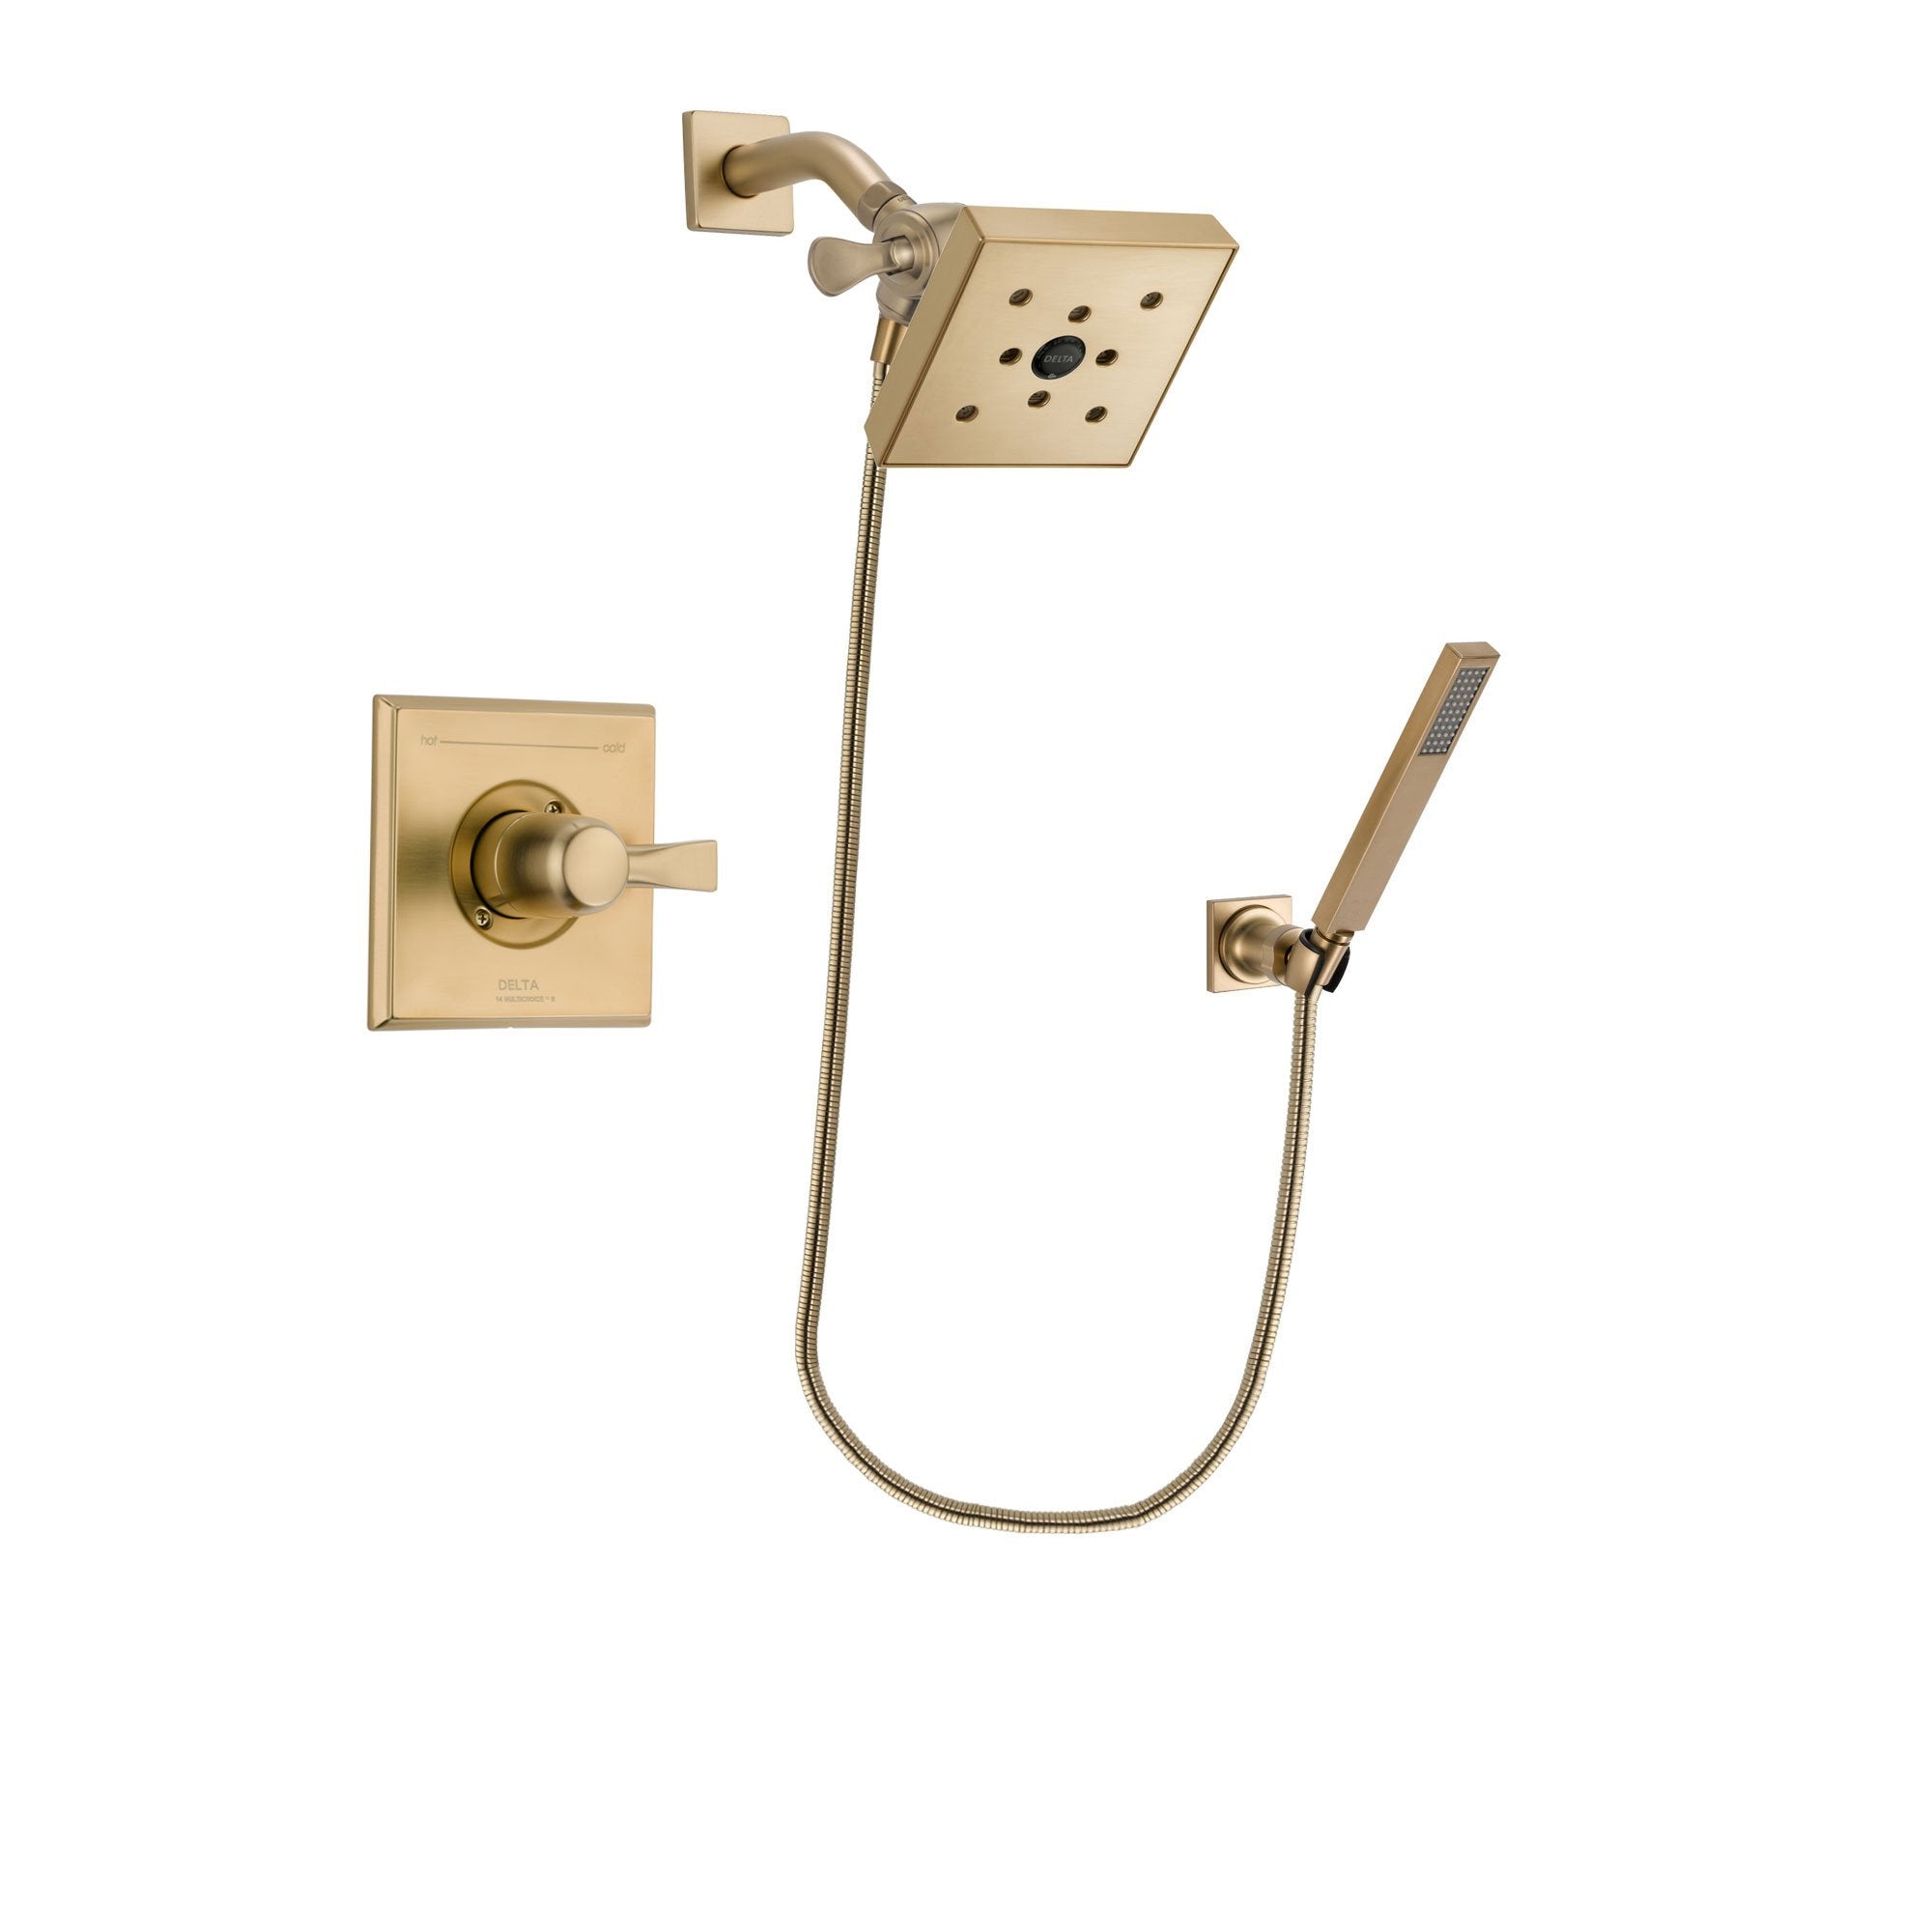 Delta Dryden Champagne Bronze Finish Shower Faucet System Package with Square Shower Head and Modern Wall-Mount Handheld Shower Stick Includes Rough-in Valve DSP3902V